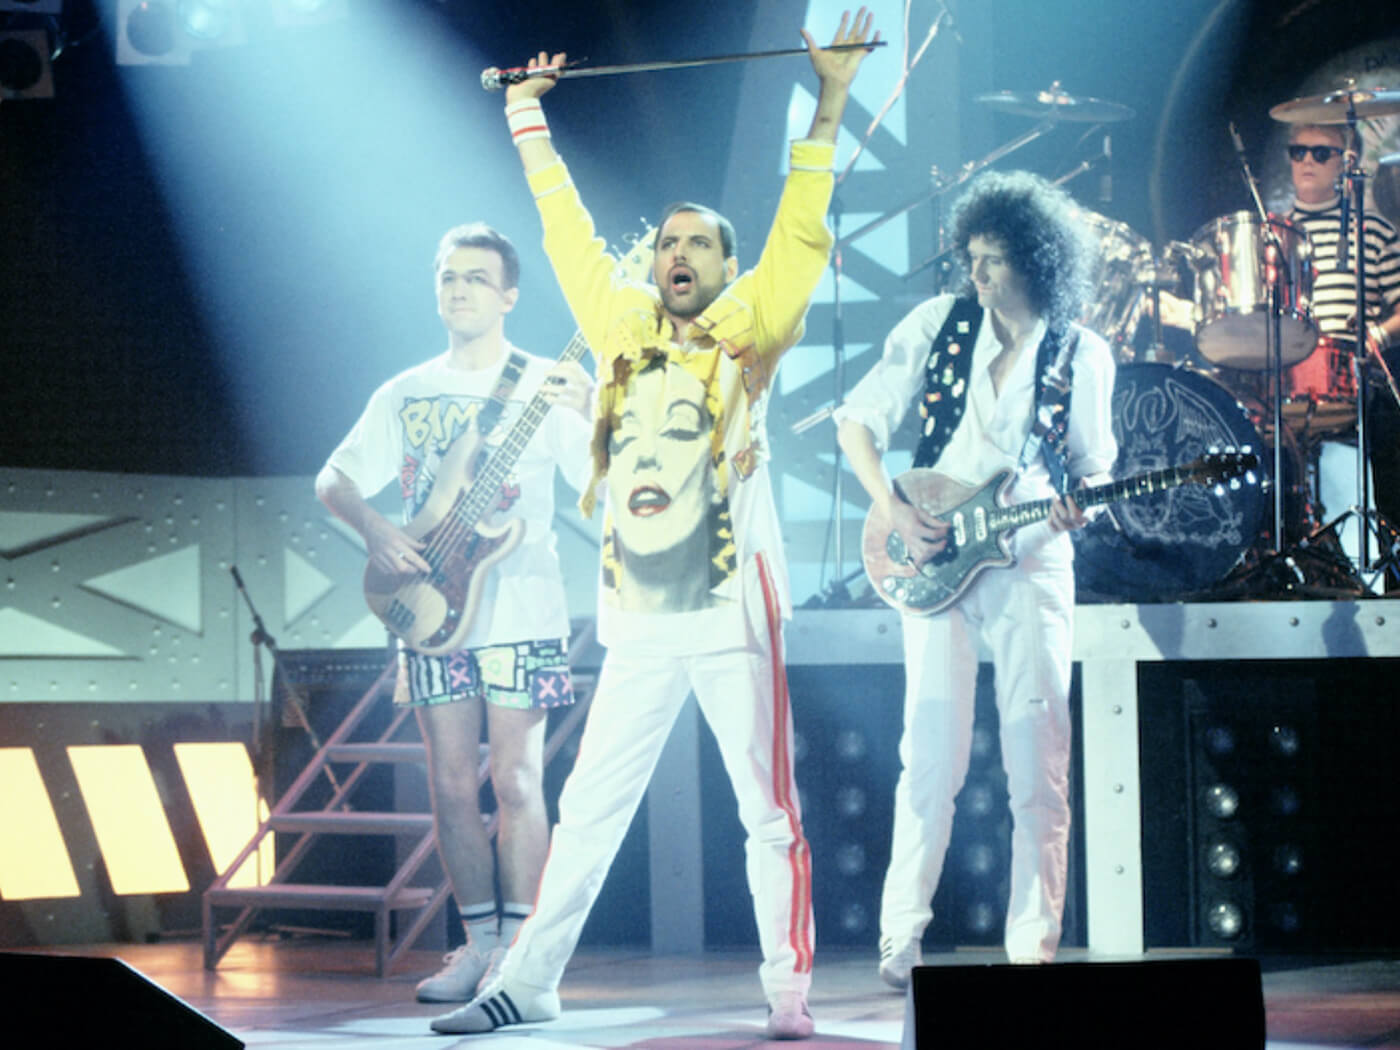 Queen share rediscovered track featuring Freddie Mercury, “Face It Alone”